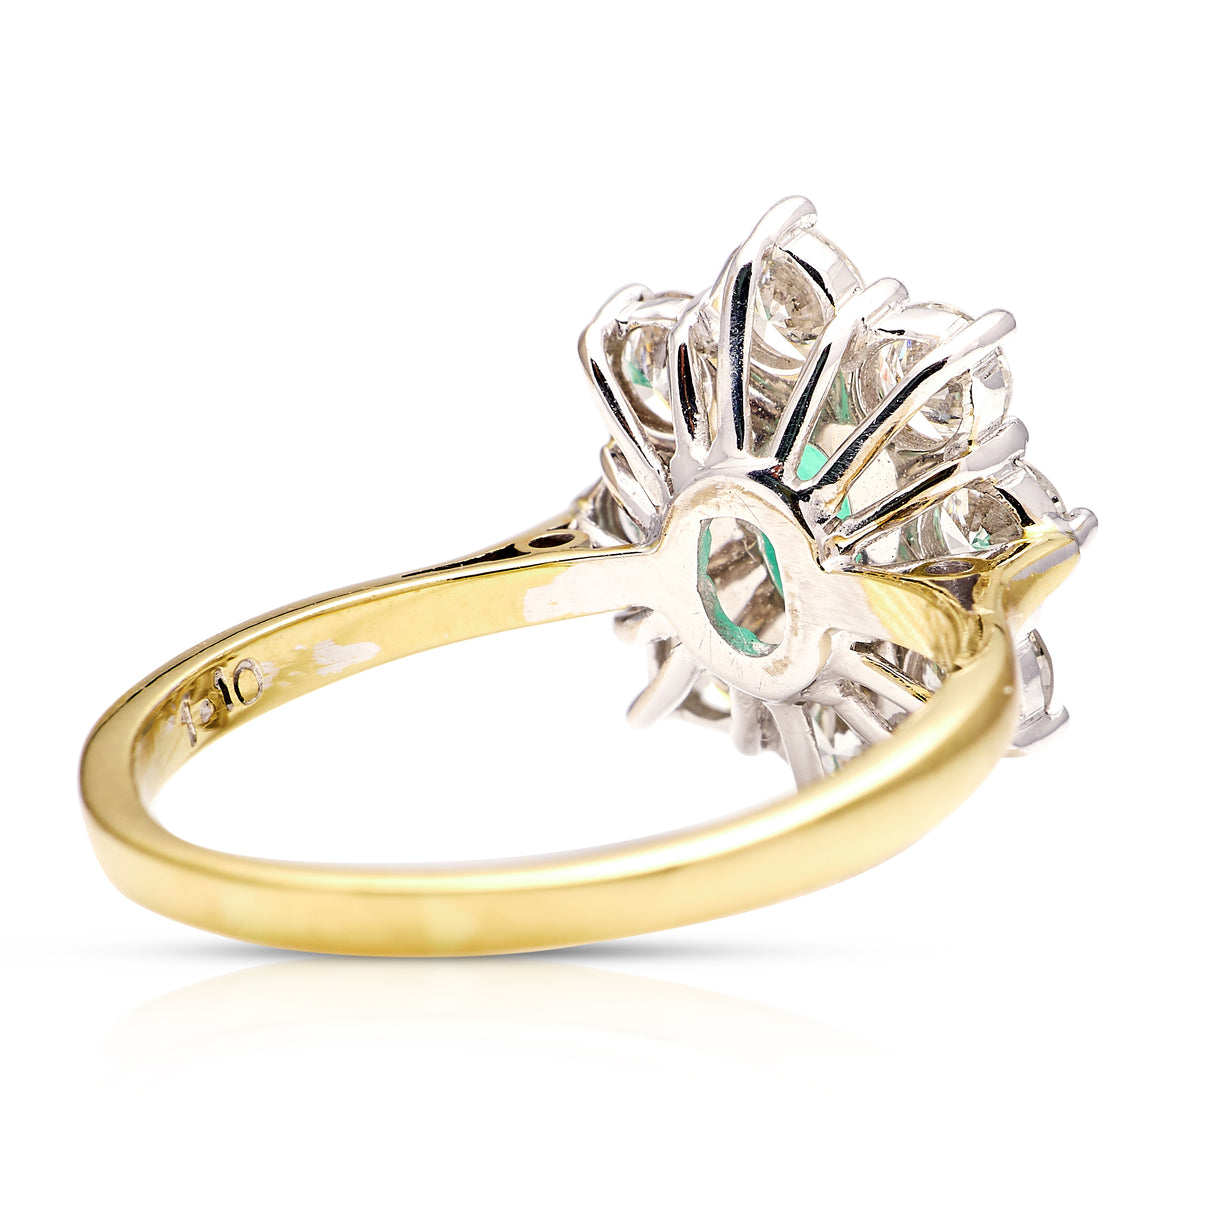 Vintage, 1960s emerald and diamond cluster ring, 18ct yellow gold